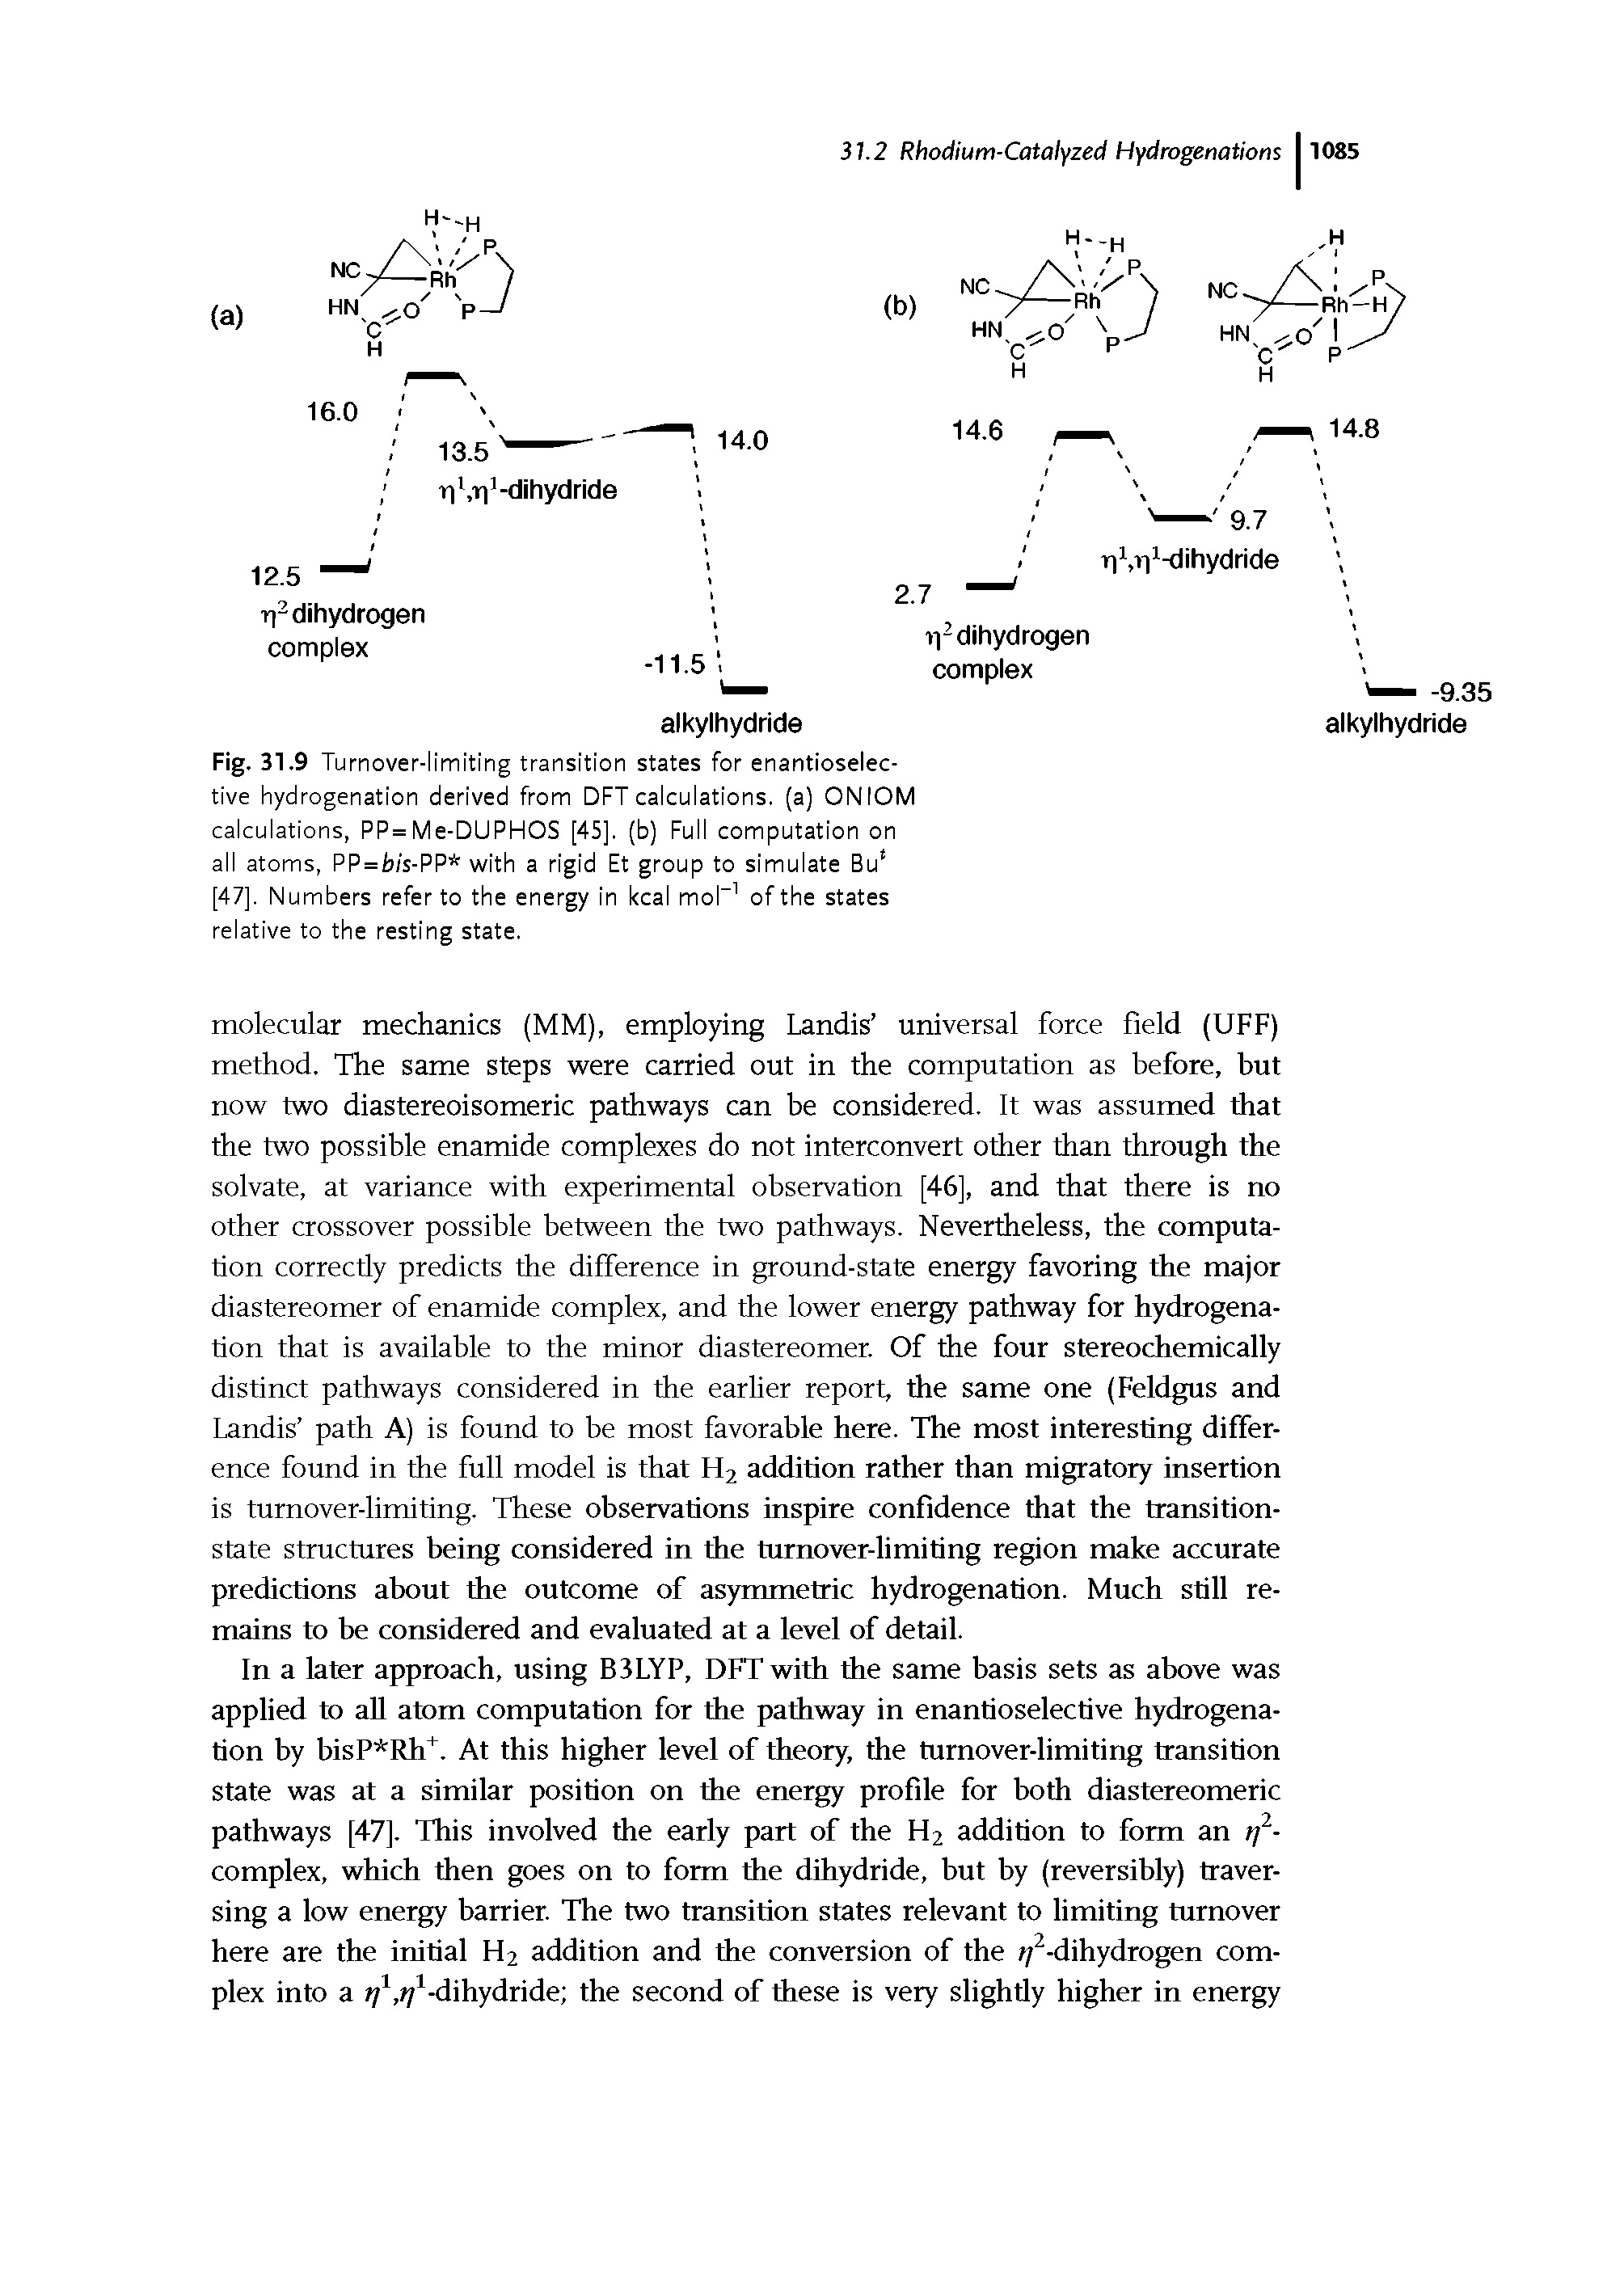 Fig. 31.9 Turnover-limiting transition states for enantioselec-tive hydrogenation derived from DFT calculations, (a) ONIOM calculations, PP=Me-DUPHOS [45]. (b) Full computation on all atoms, PP = Ws-PP with a rigid Et group to simulate Bu [47], Numbers refer to the energy in kcal mol-1 of the states relative to the resting state.